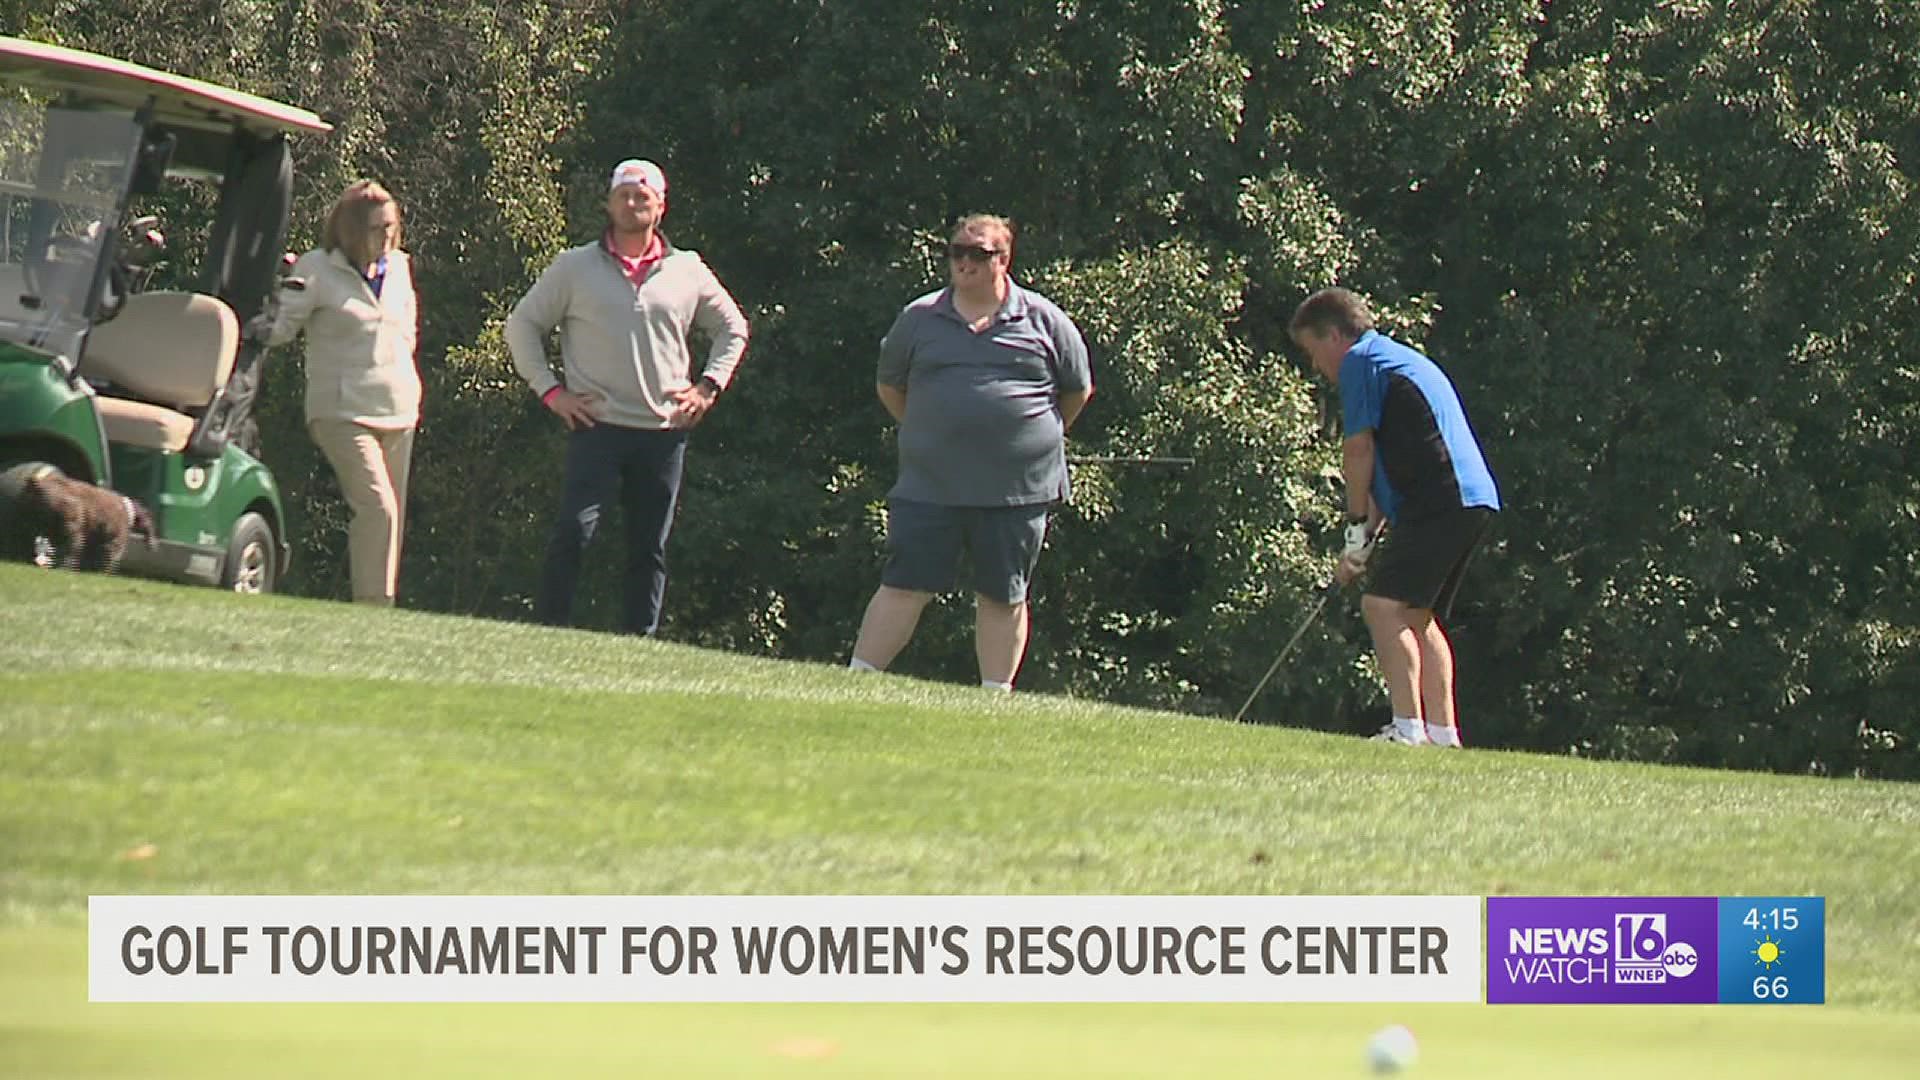 The golf tournament is their biggest fundraiser of the year.